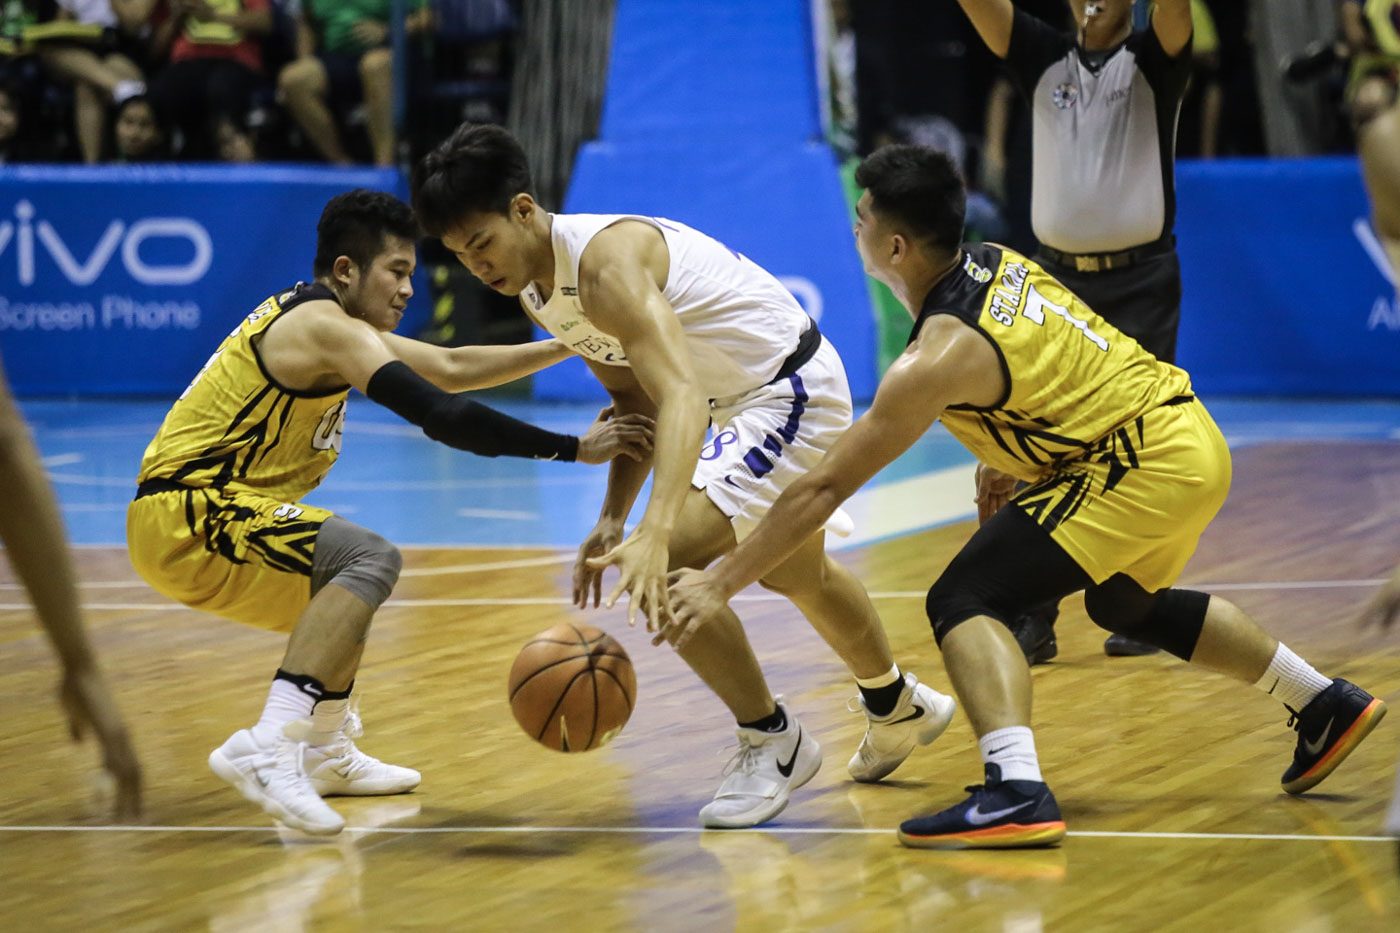 ‘No disrespect meant’ by late dunk from Blue Eagles rookie Mallilin